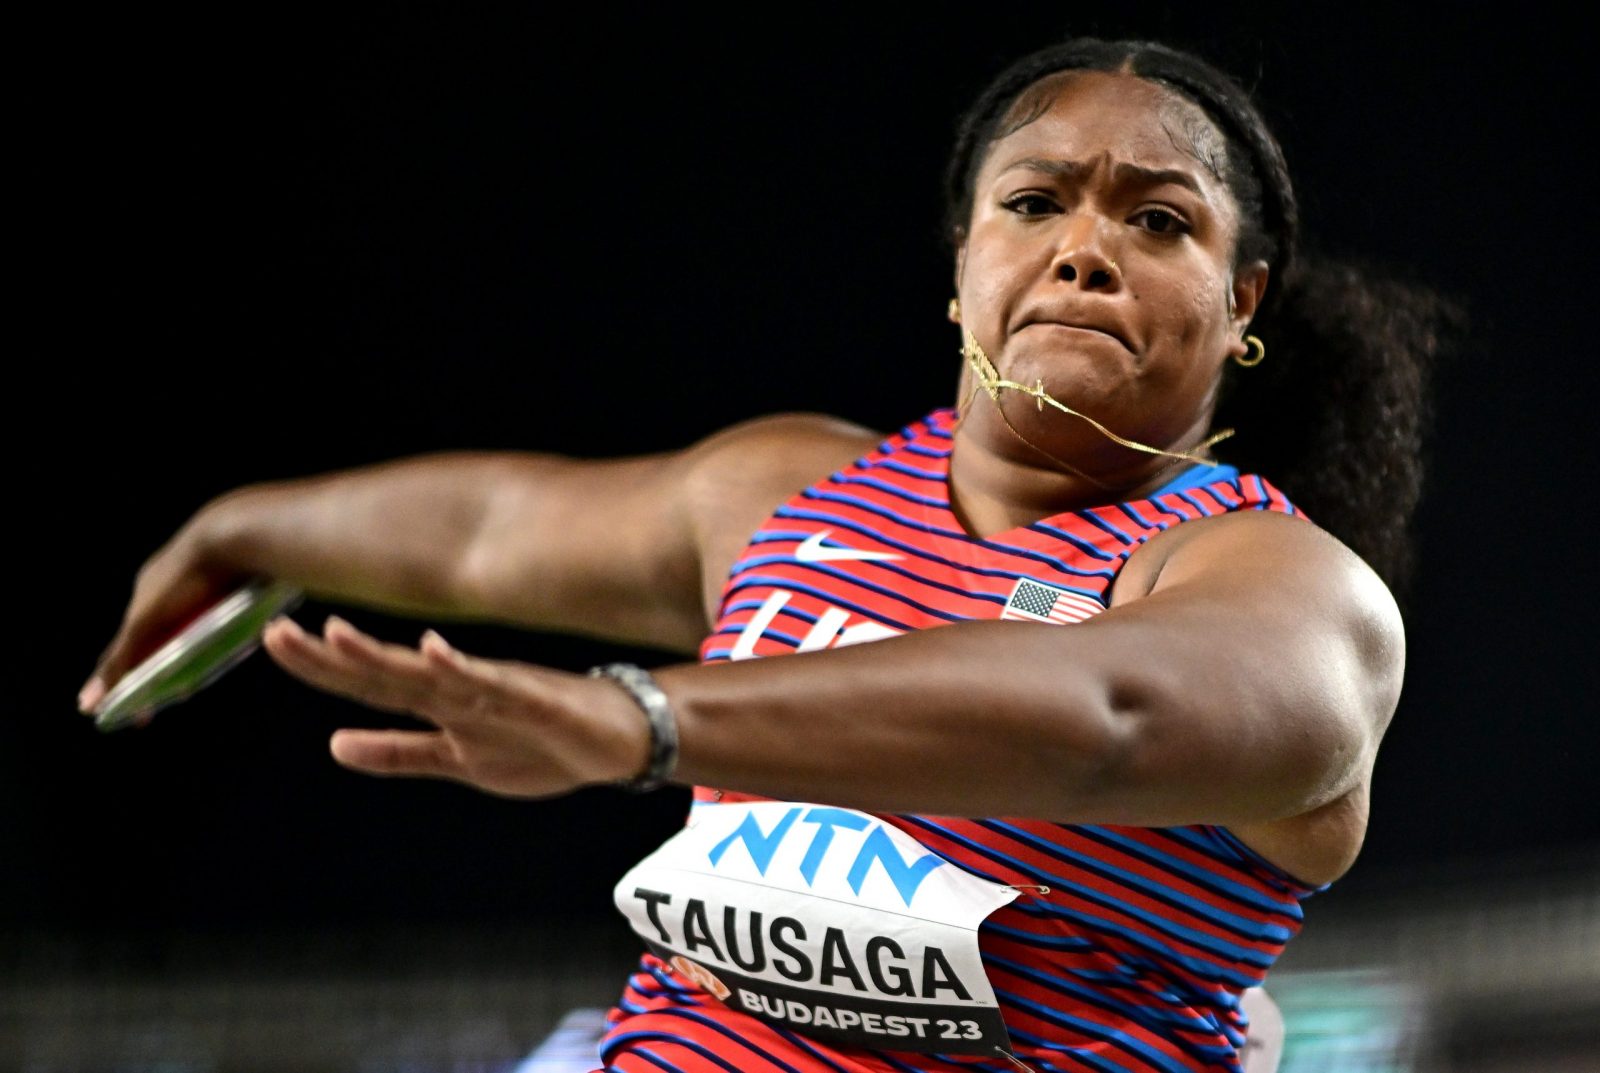 epa10814108 Laulauga Tausaga of the USA competes in the Women's Discus Throw final at the World Athletics Championships Budapest, Hungary, 22 August 2023.  EPA/CHRISTIAN BRUNA